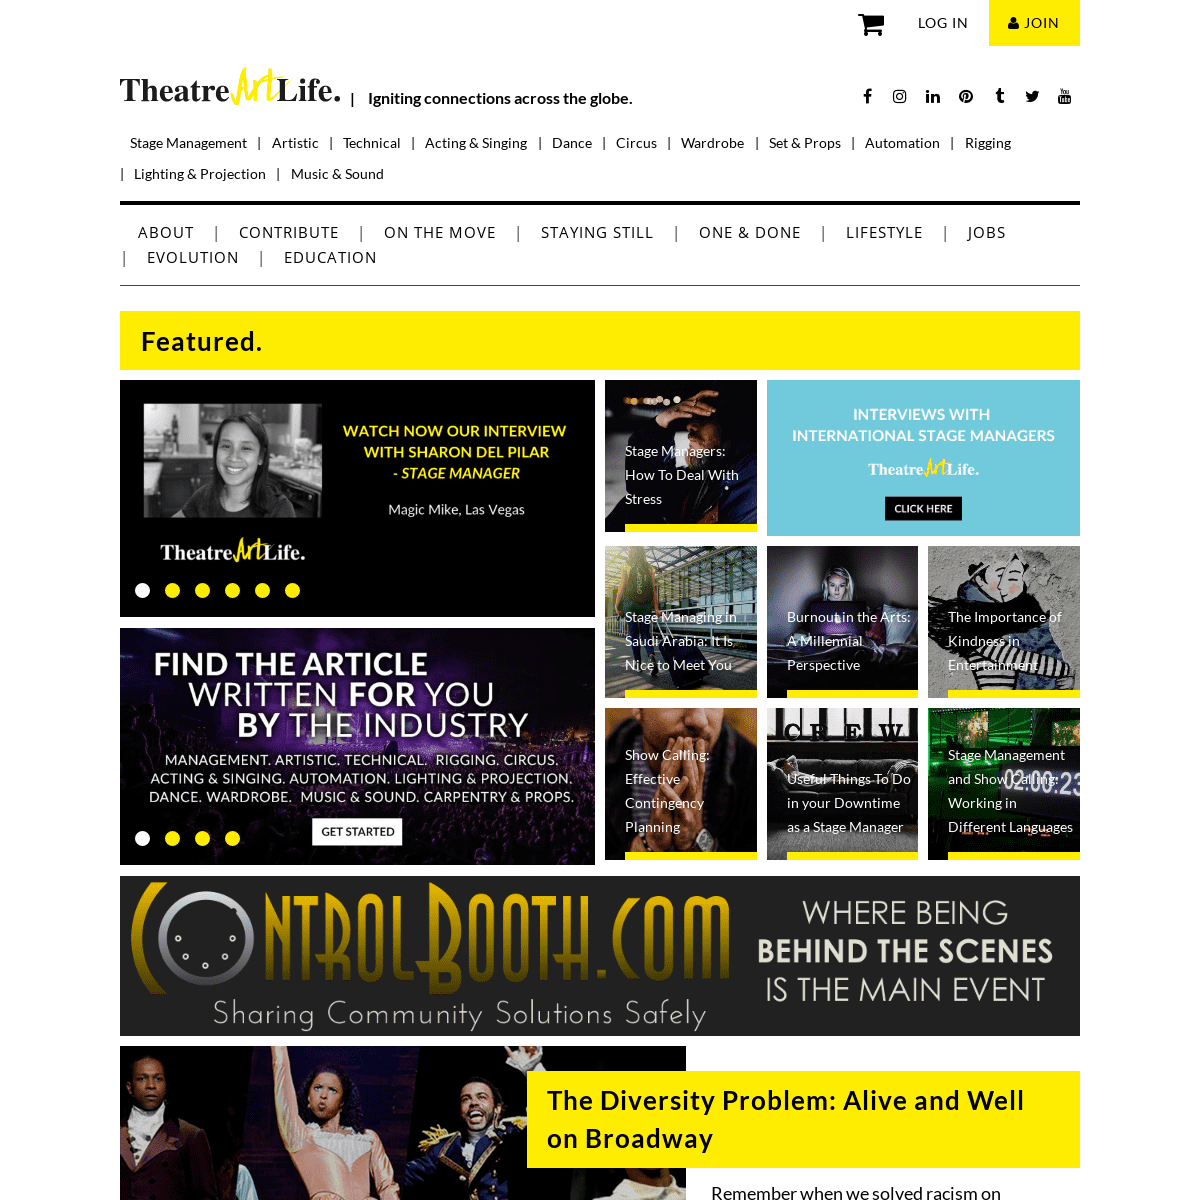 A complete backup of theatreartlife.com